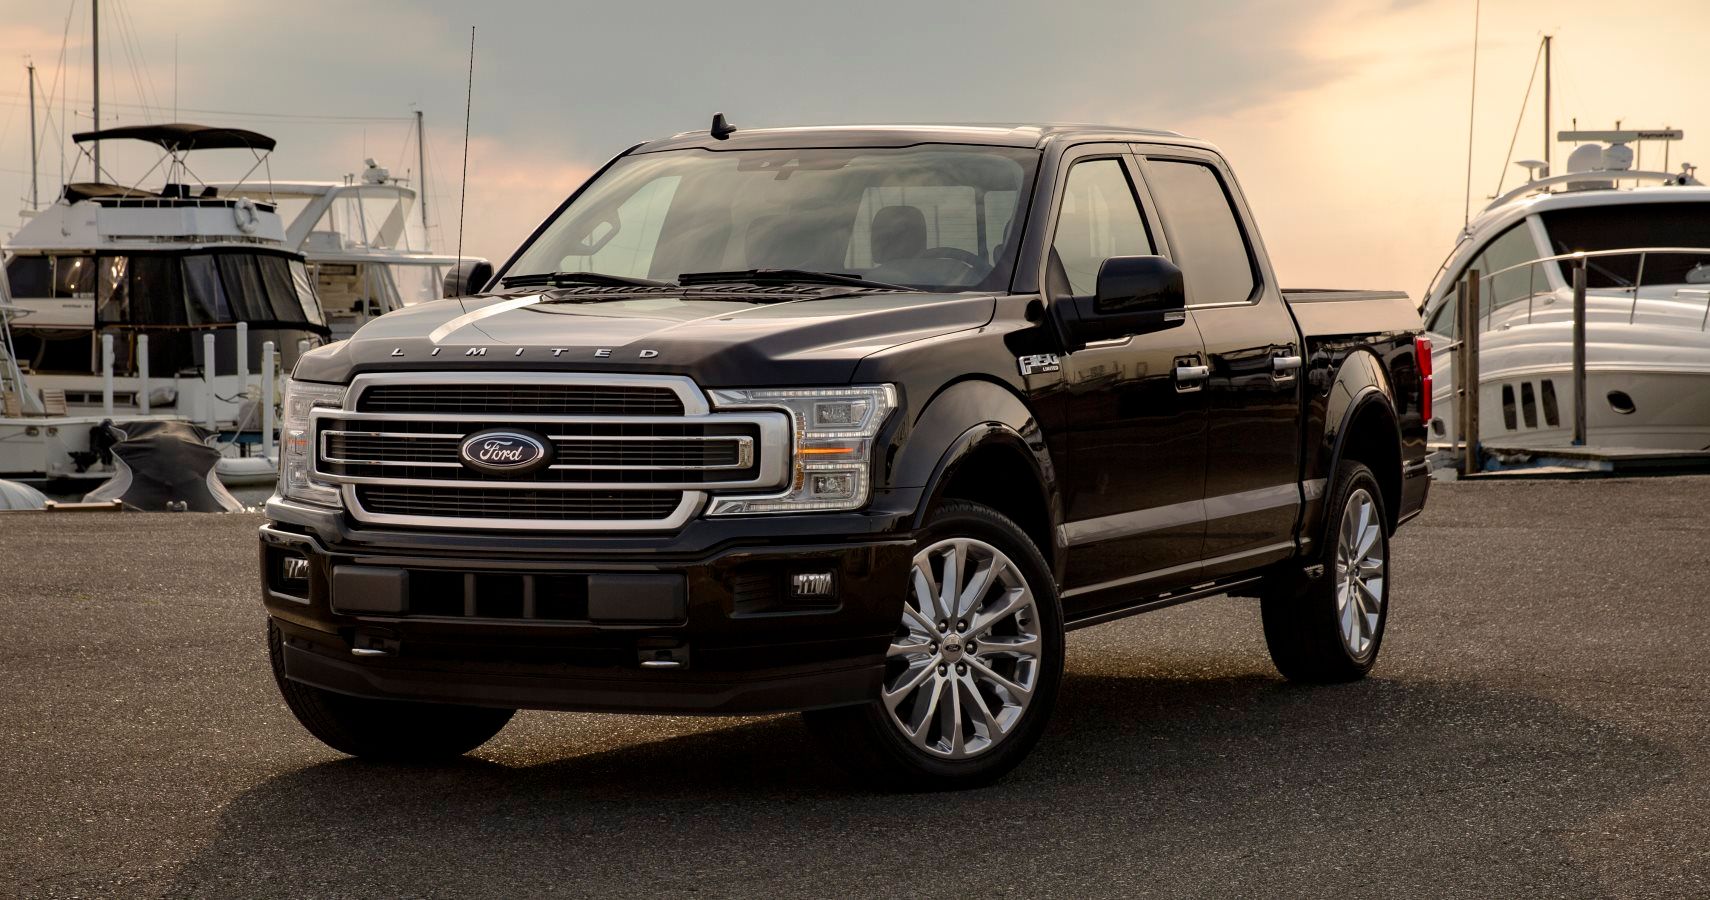 Ohio Ford Dealer Offering 750 HP Ford F-150s For Super Low Price